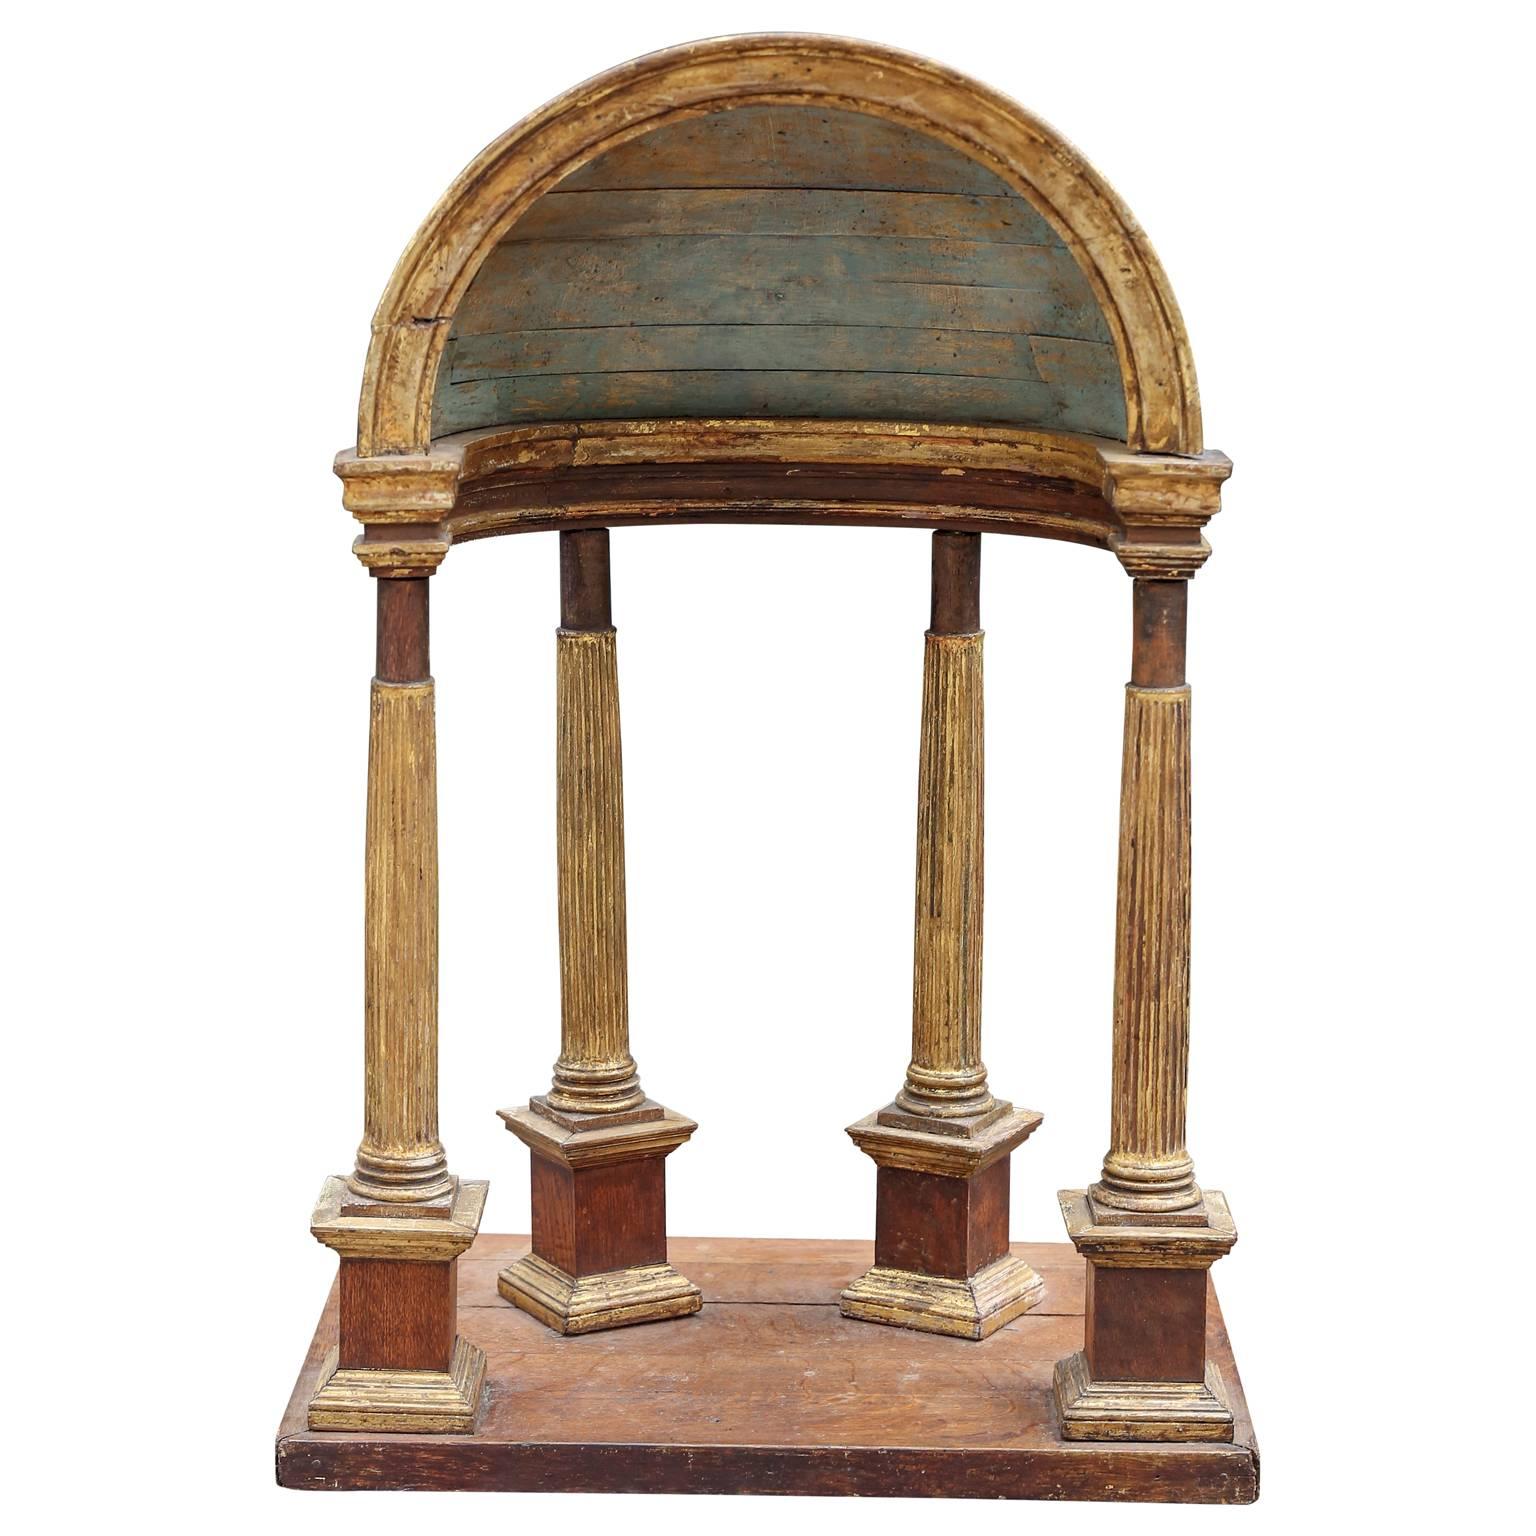 19th century oak baldachin or domed niche/architectural model with fluted giltwood columns/detail and weathered blue painted interior.